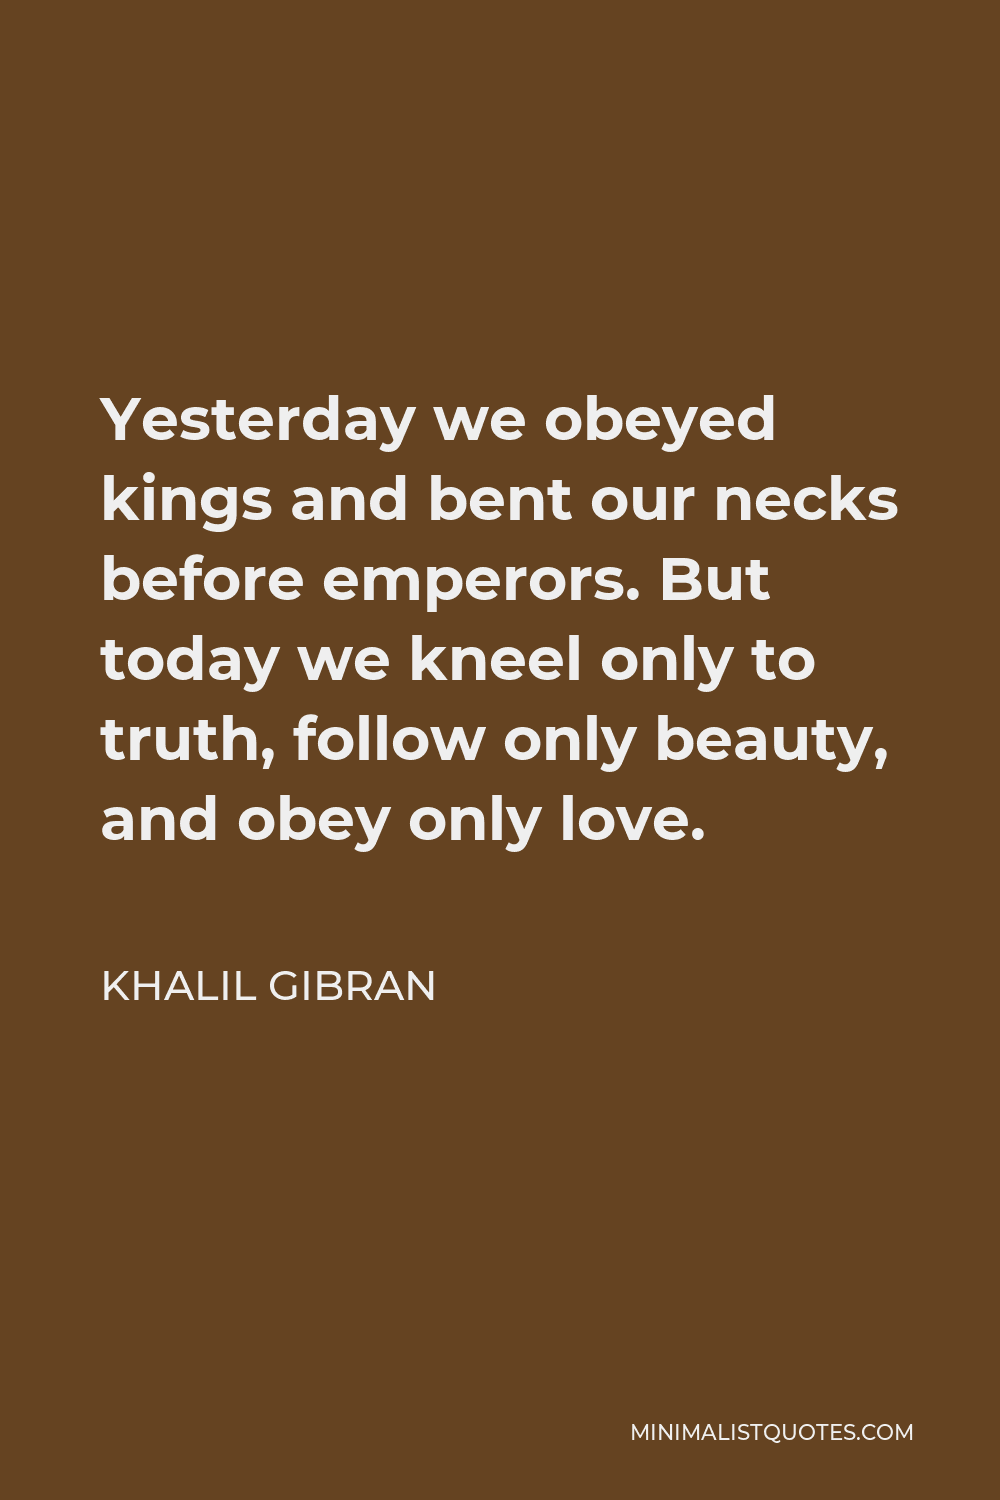 Khalil Gibran Quote - Yesterday we obeyed kings and bent our necks before emperors. But today we kneel only to truth, follow only beauty, and obey only love.